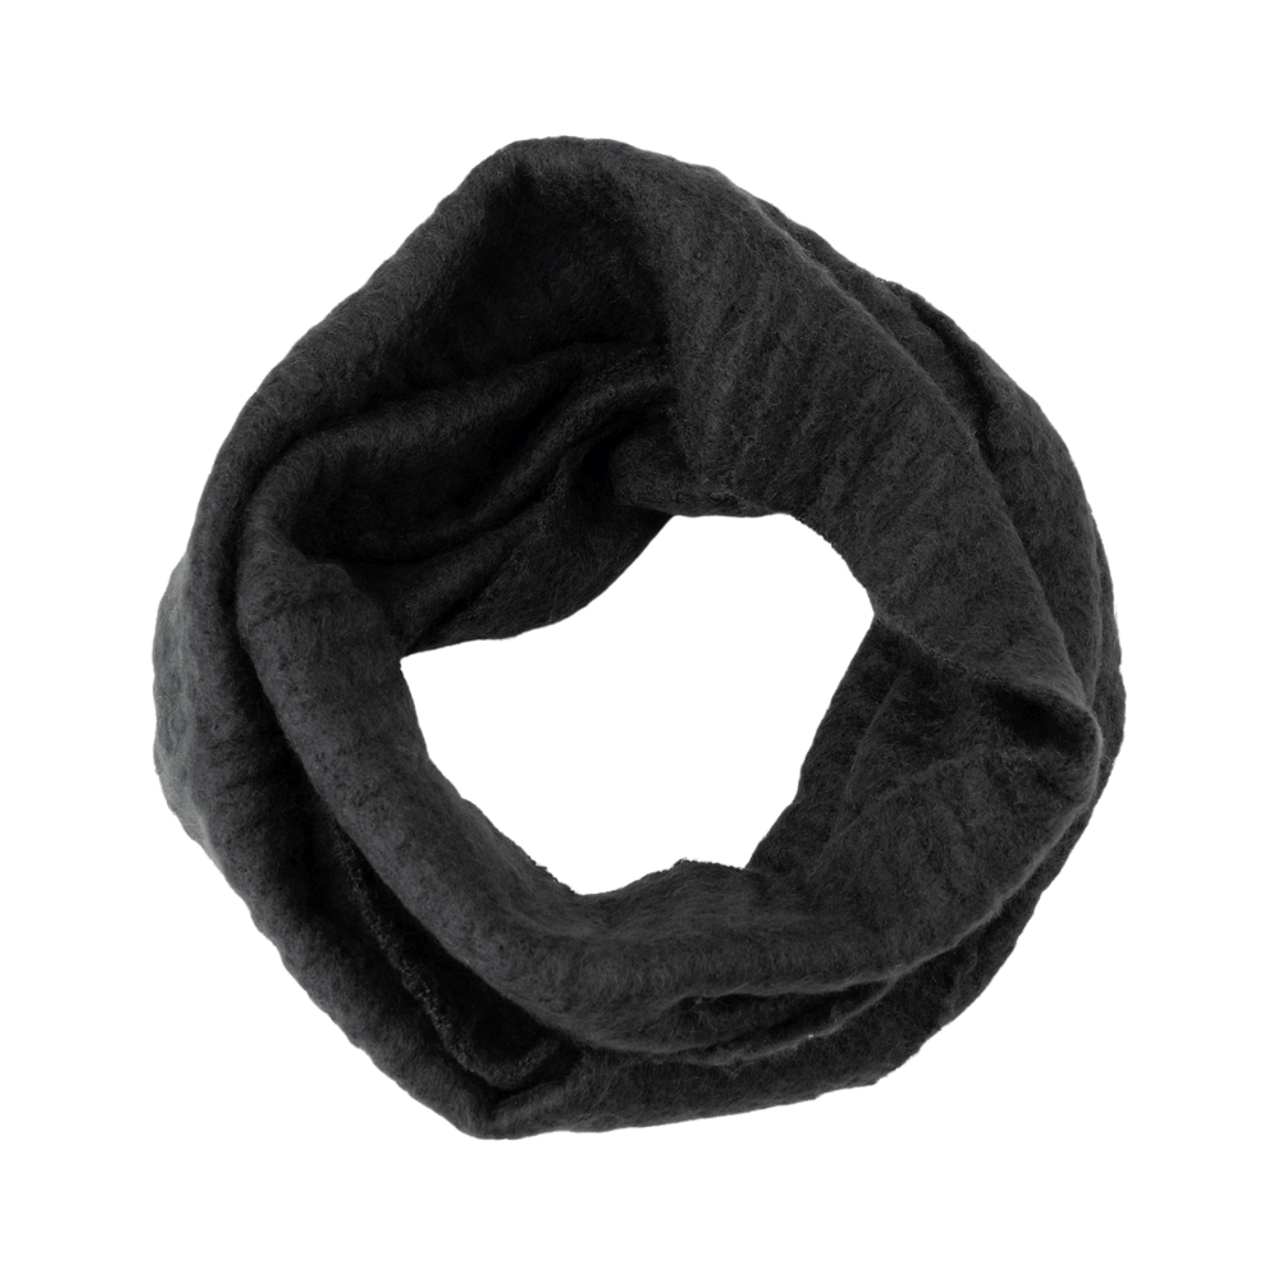 Britt's Knits Common Good Recycled Infinity Scarf Black